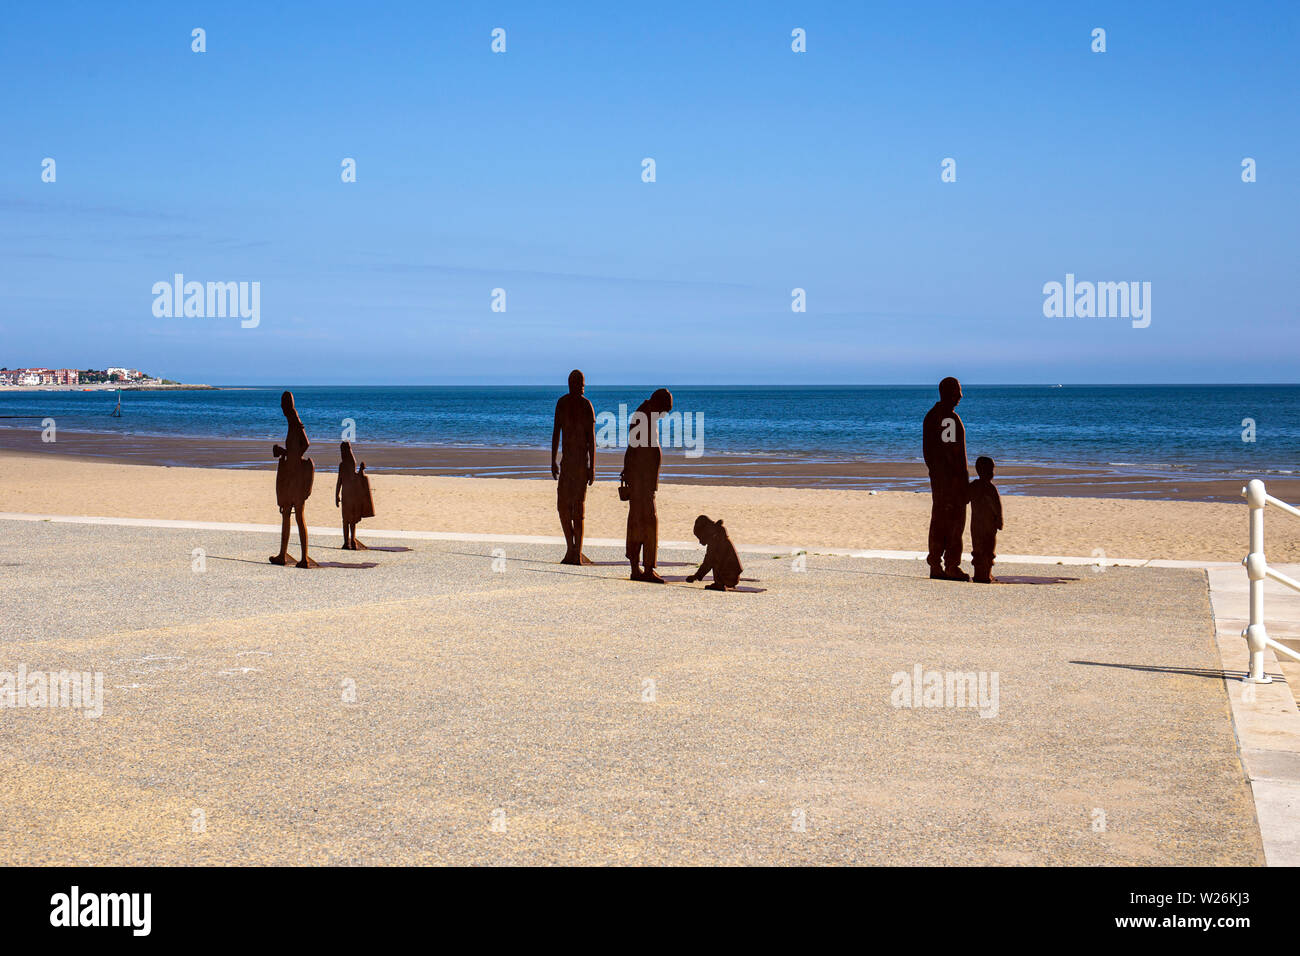 Beach sculptures, by Freshwest on the promenade in Colwyn Bay Wales UK Stock Photo